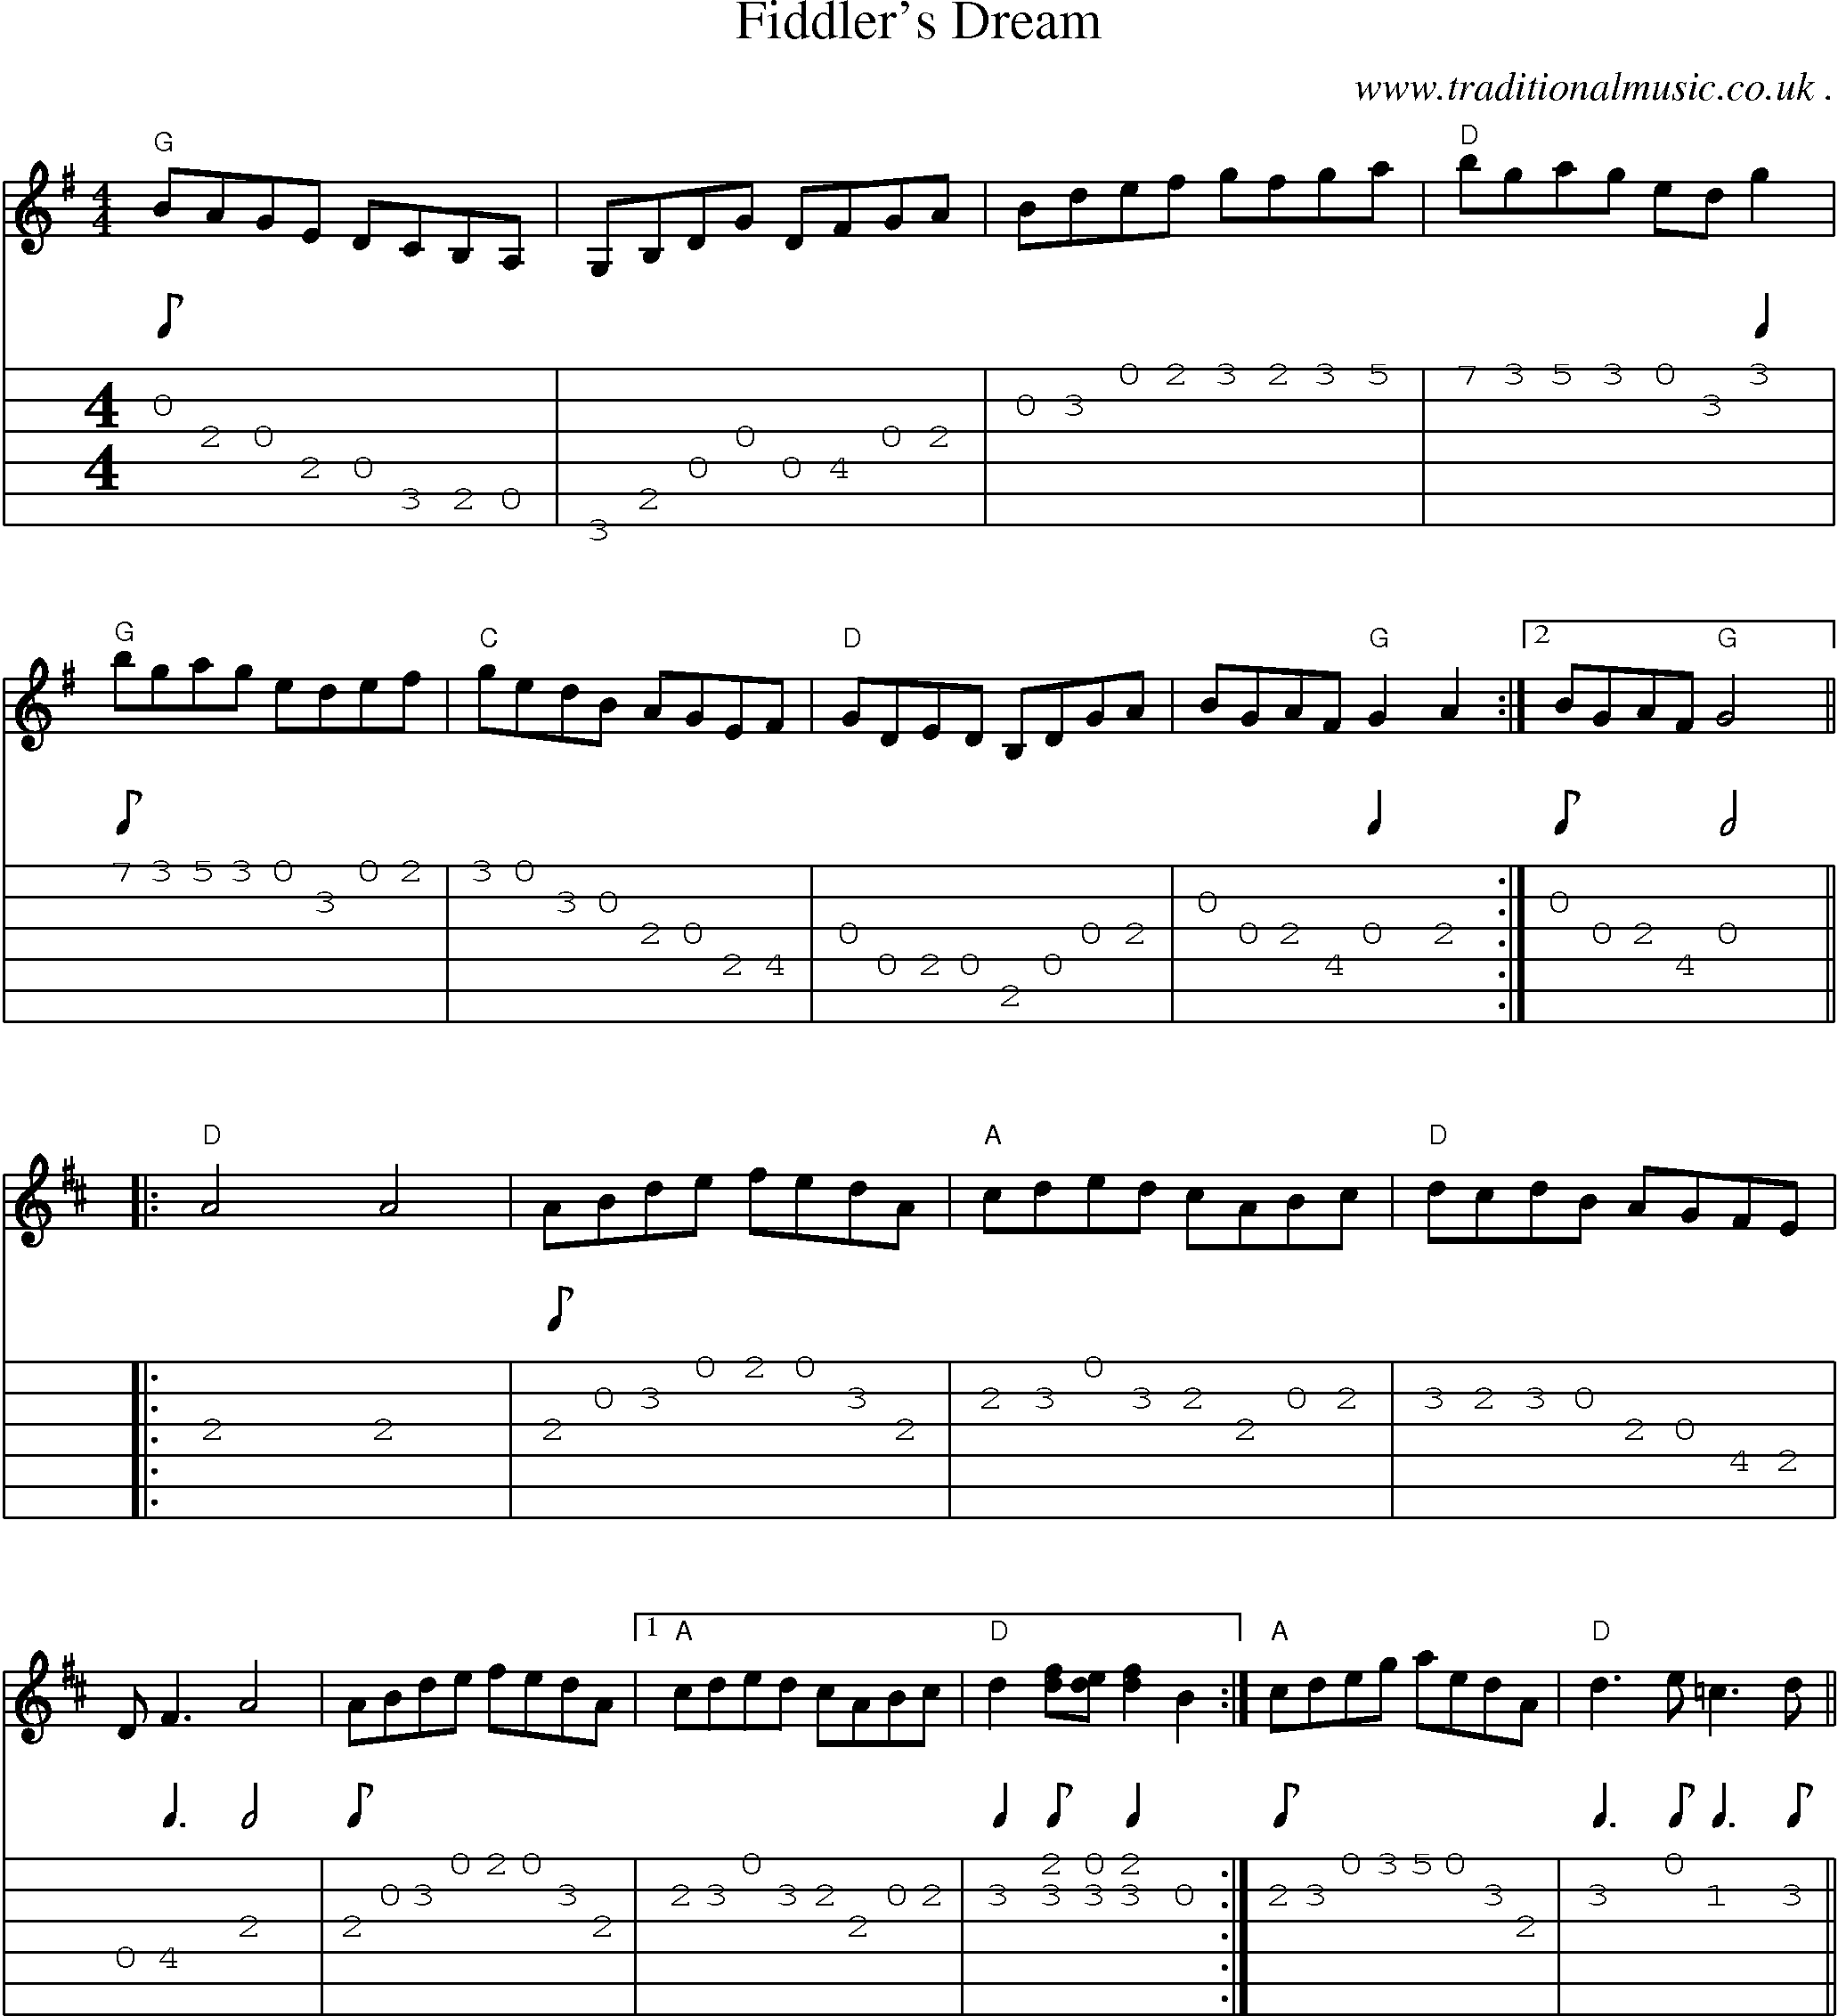 Sheet-Music and Guitar Tabs for Fiddlers Dream